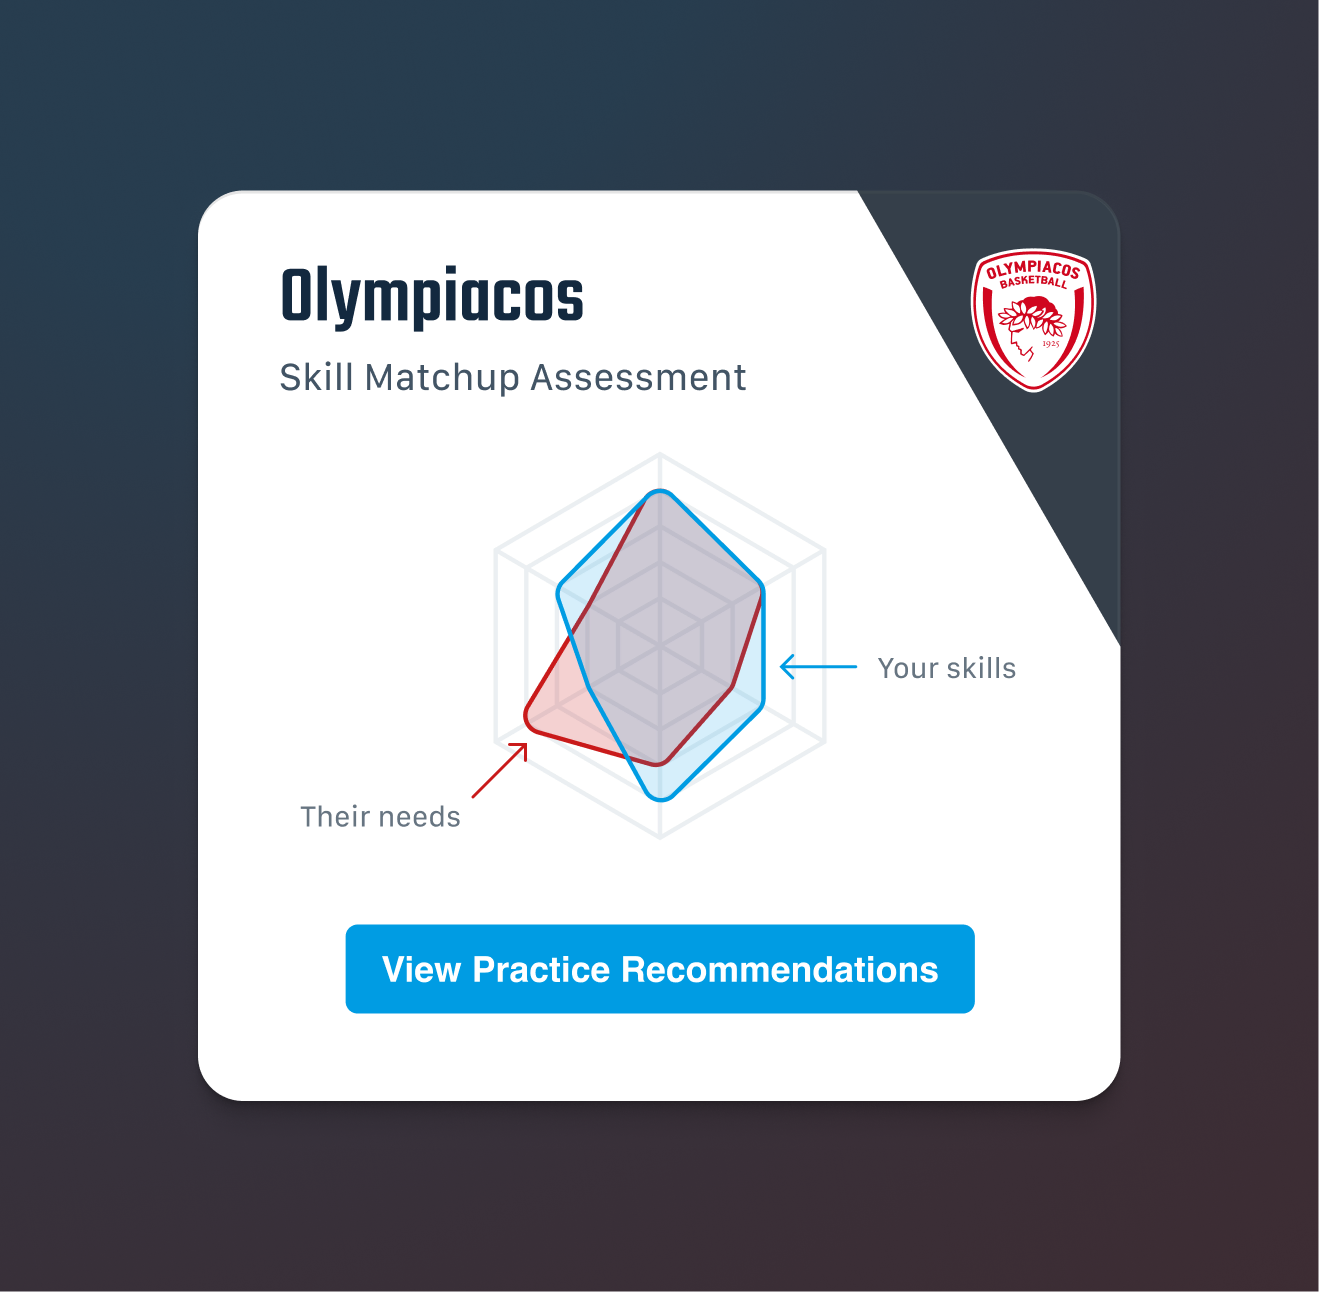 A user interface card on a background with a gradient. The card shows a spider graph with two different categories, one labeled 'Your Skills' and the other labeled 'Their needs'. The card is titled 'Olympiacos' with a subtitle that says 'Skill Matchup Assessment'. There is a call-to-action button at the bottom that says 'View Practice Recommendations'.